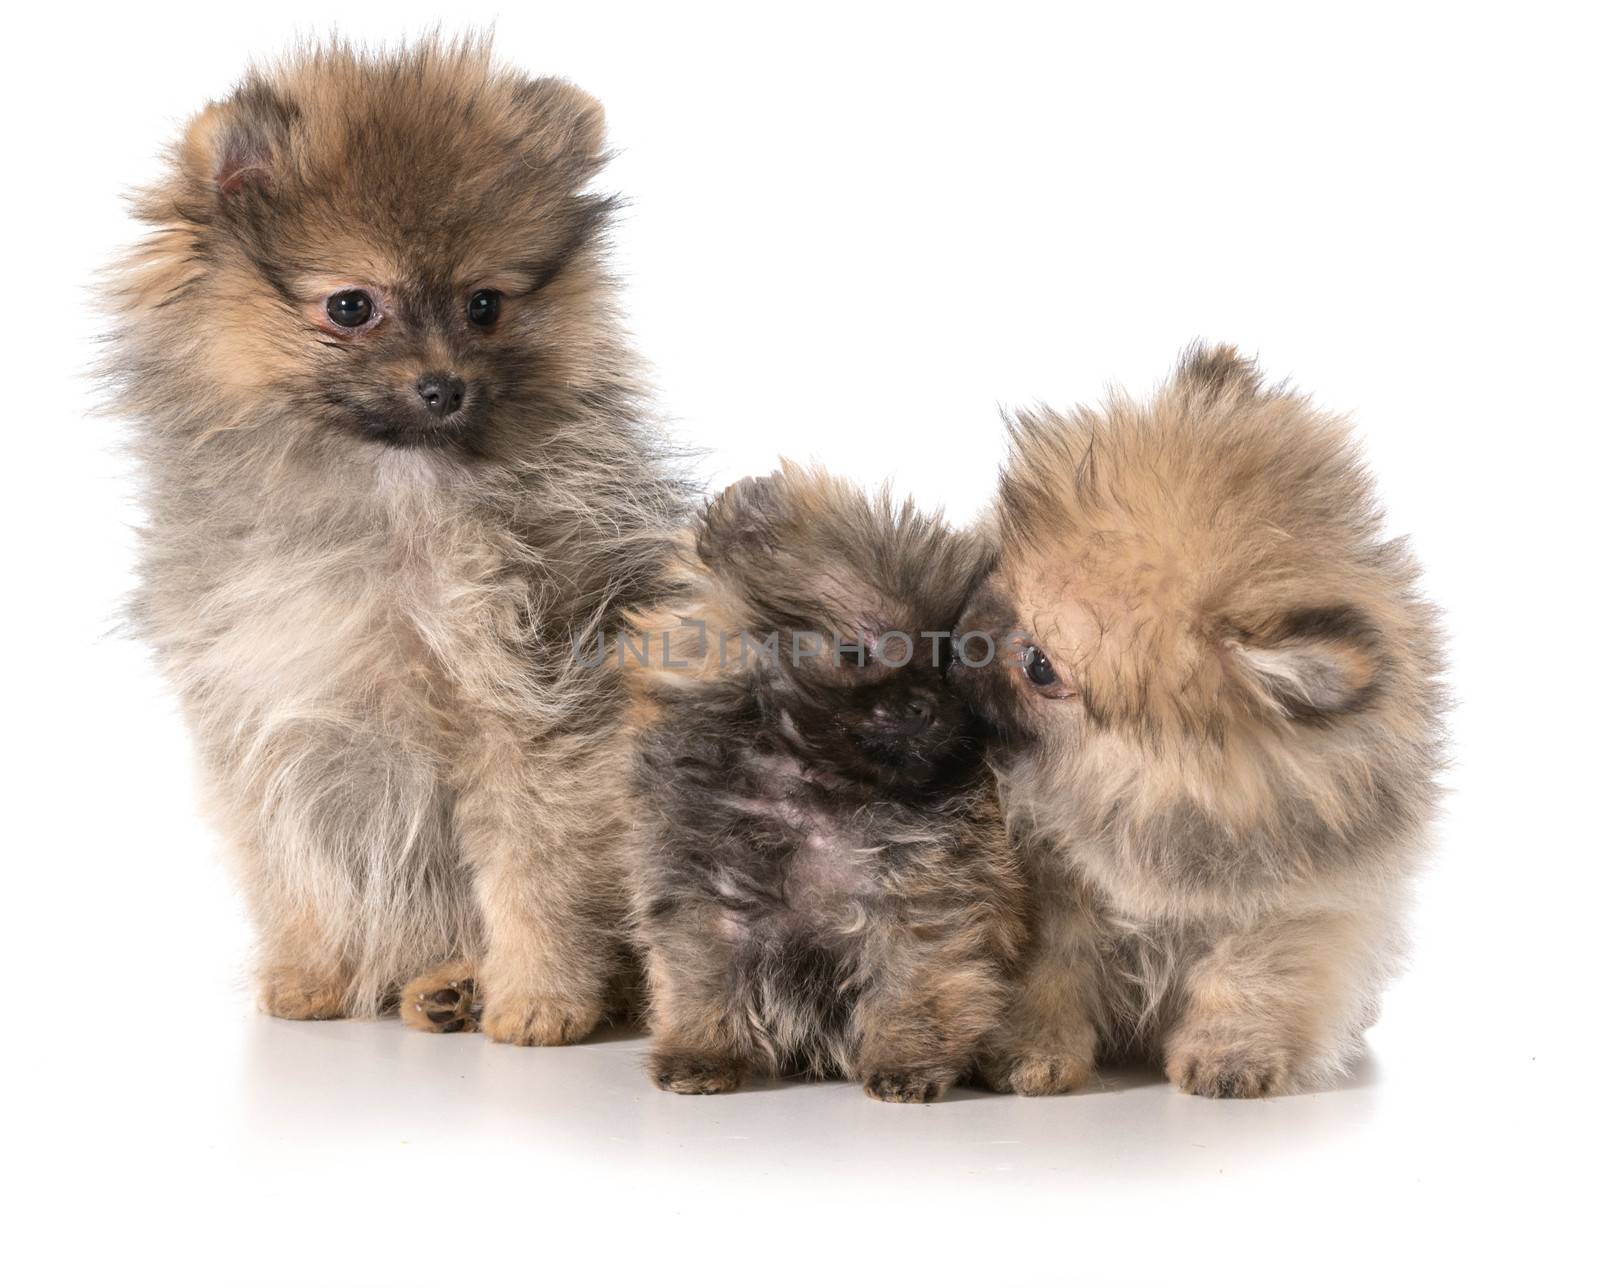 pomeranian puppies by willeecole123